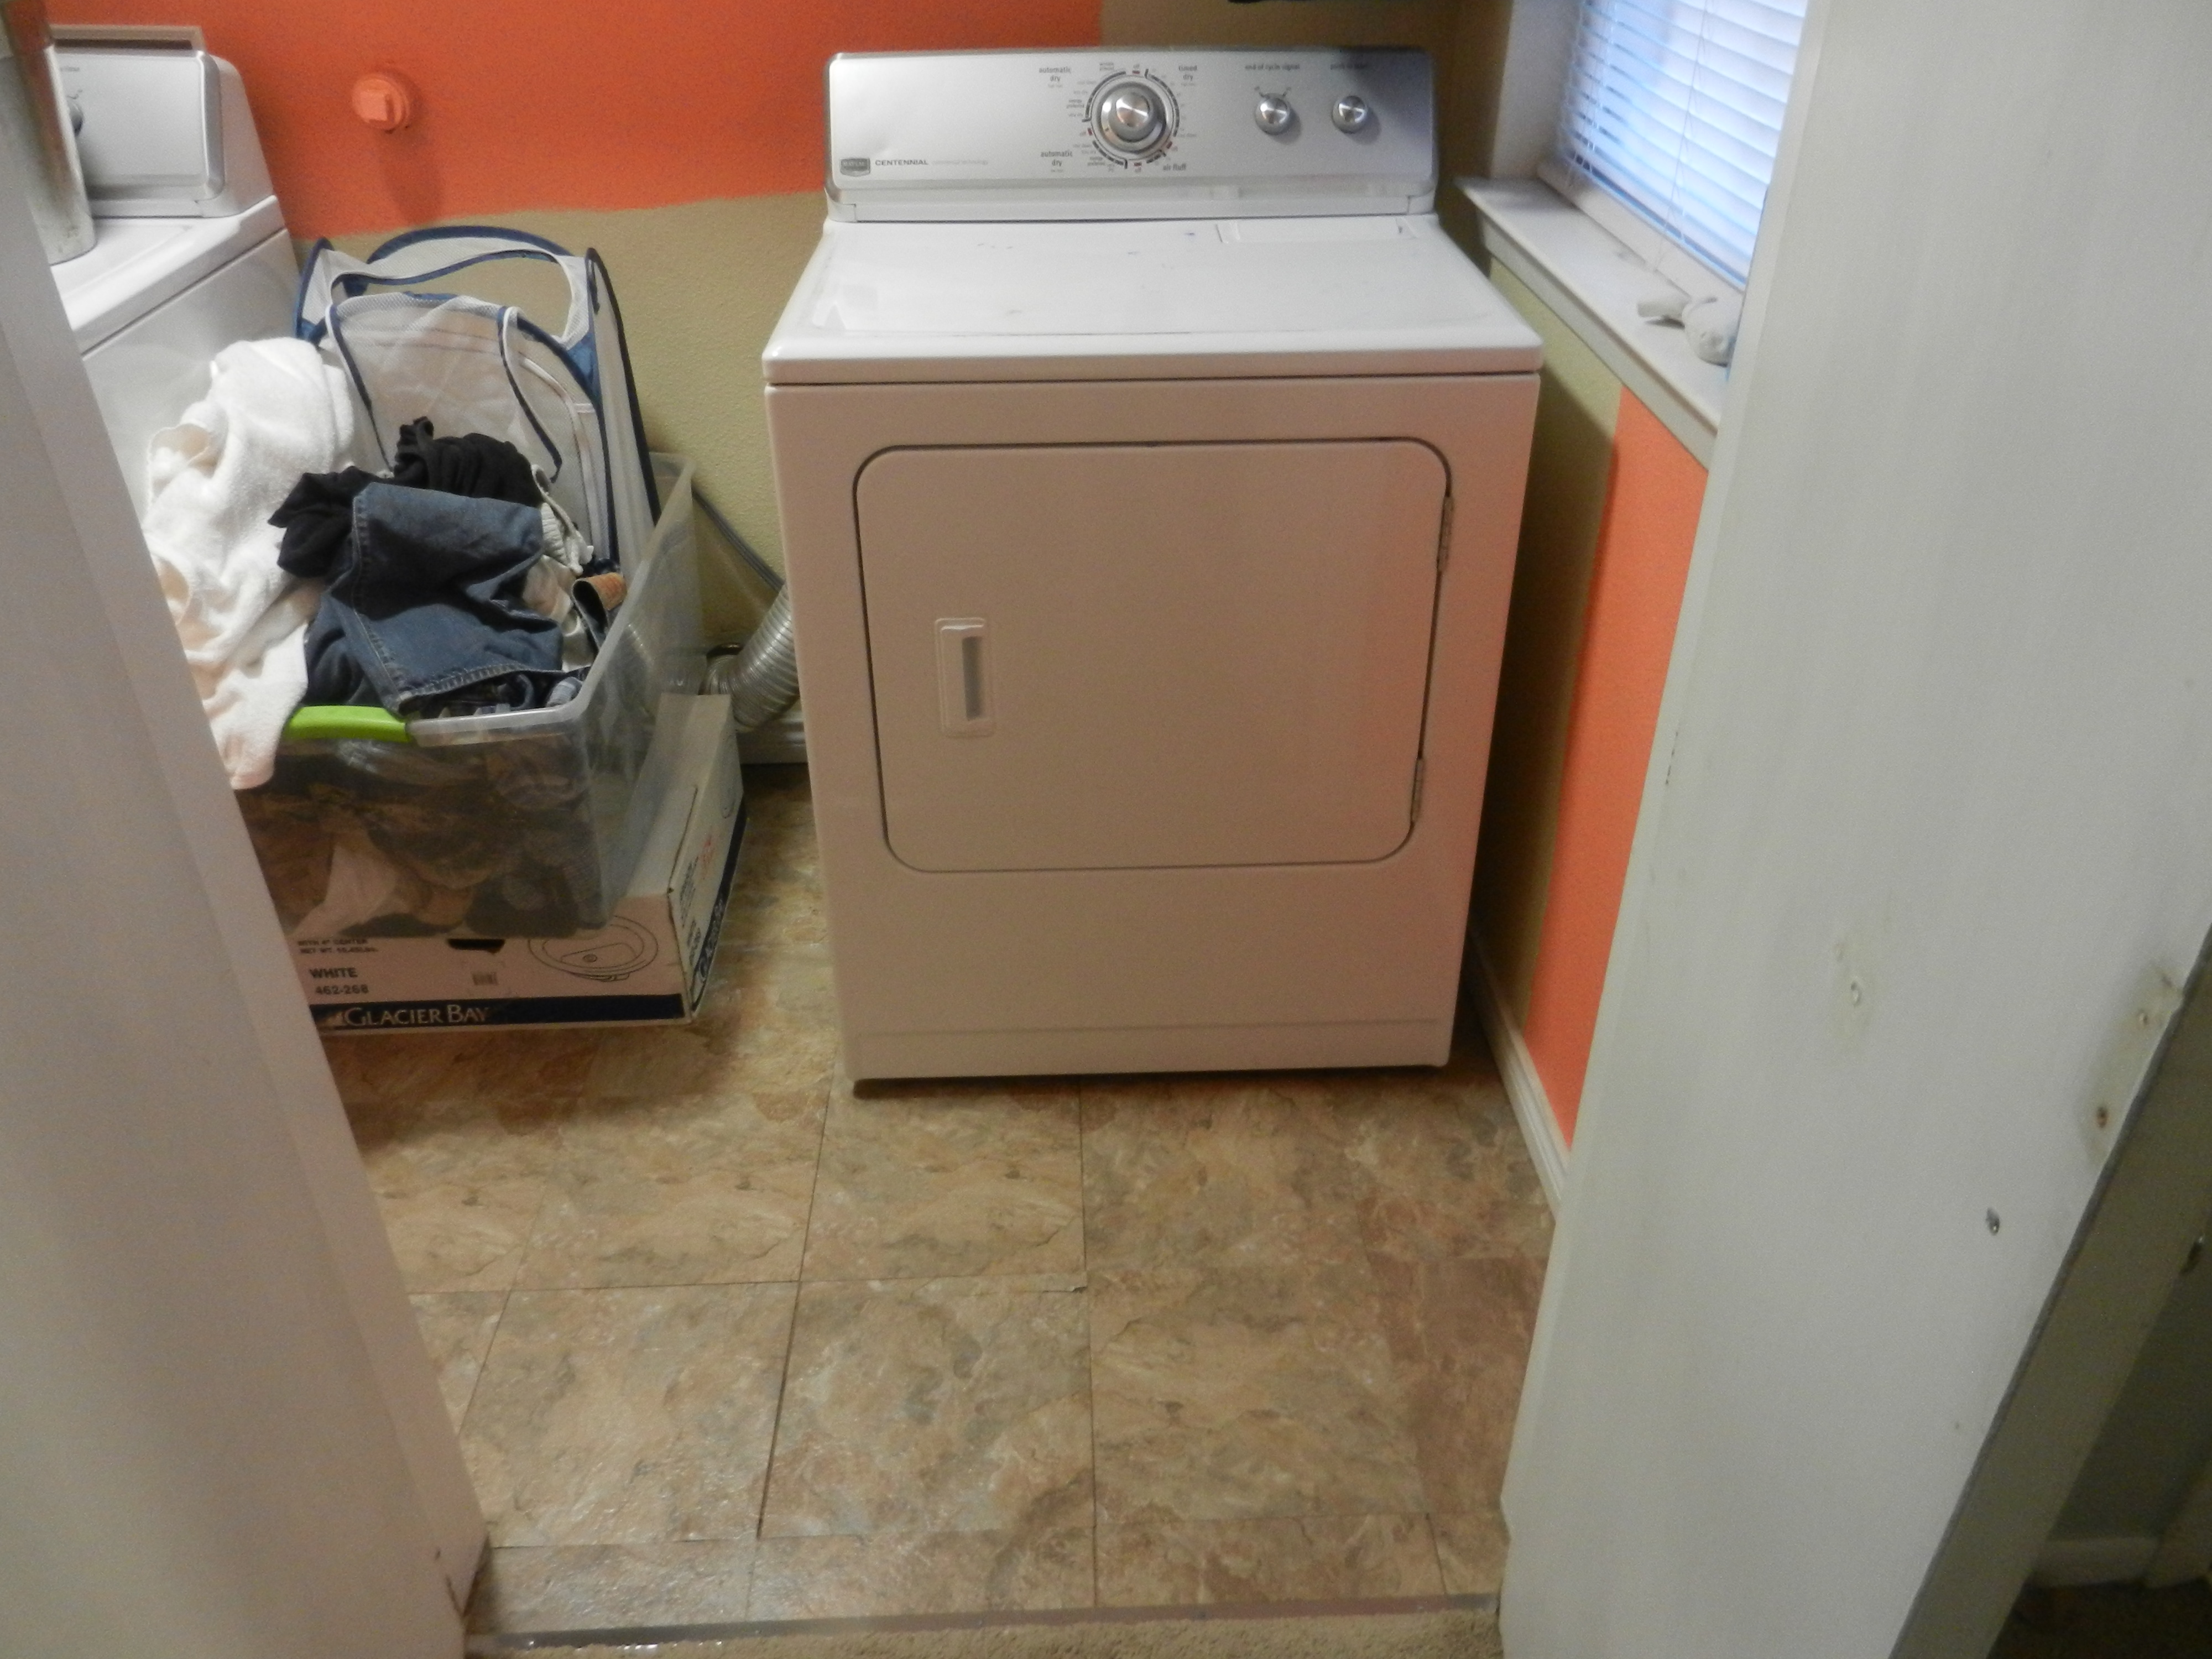 3 Ways To Push Your Dryer Against The Wall Gain Floor Space